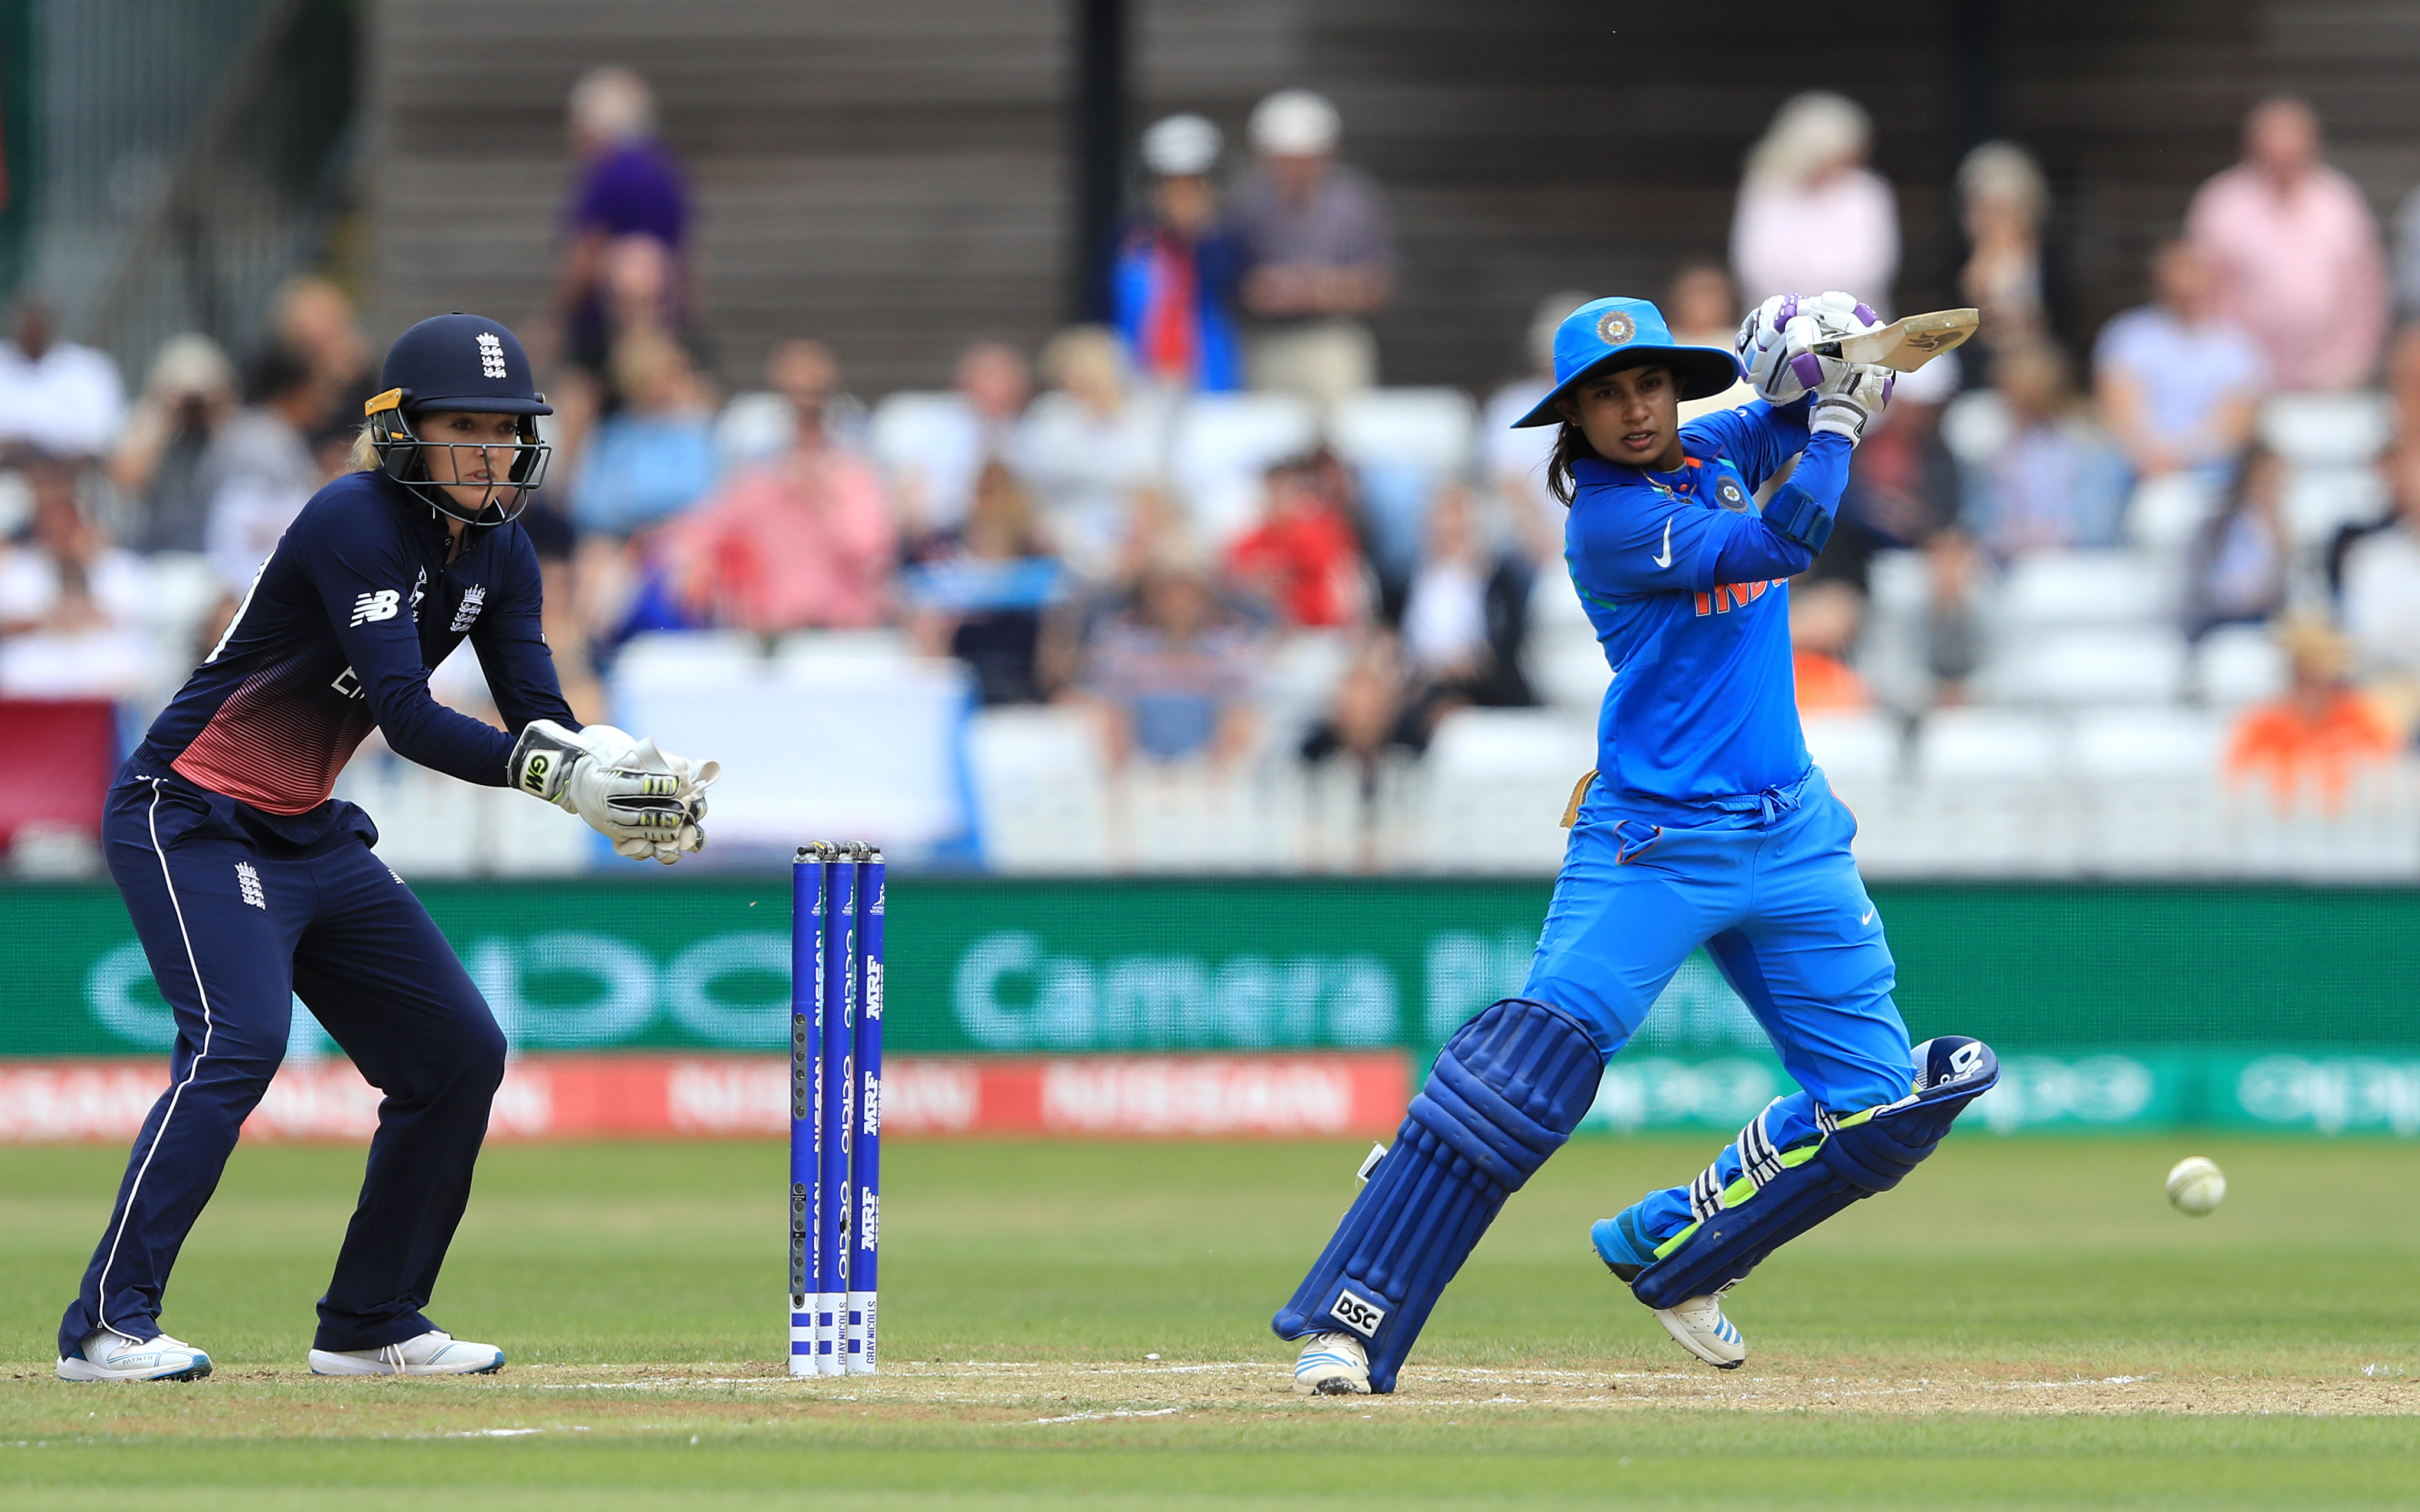 Women’s cricketers are anxious about what future holds, shares Mithali Raj